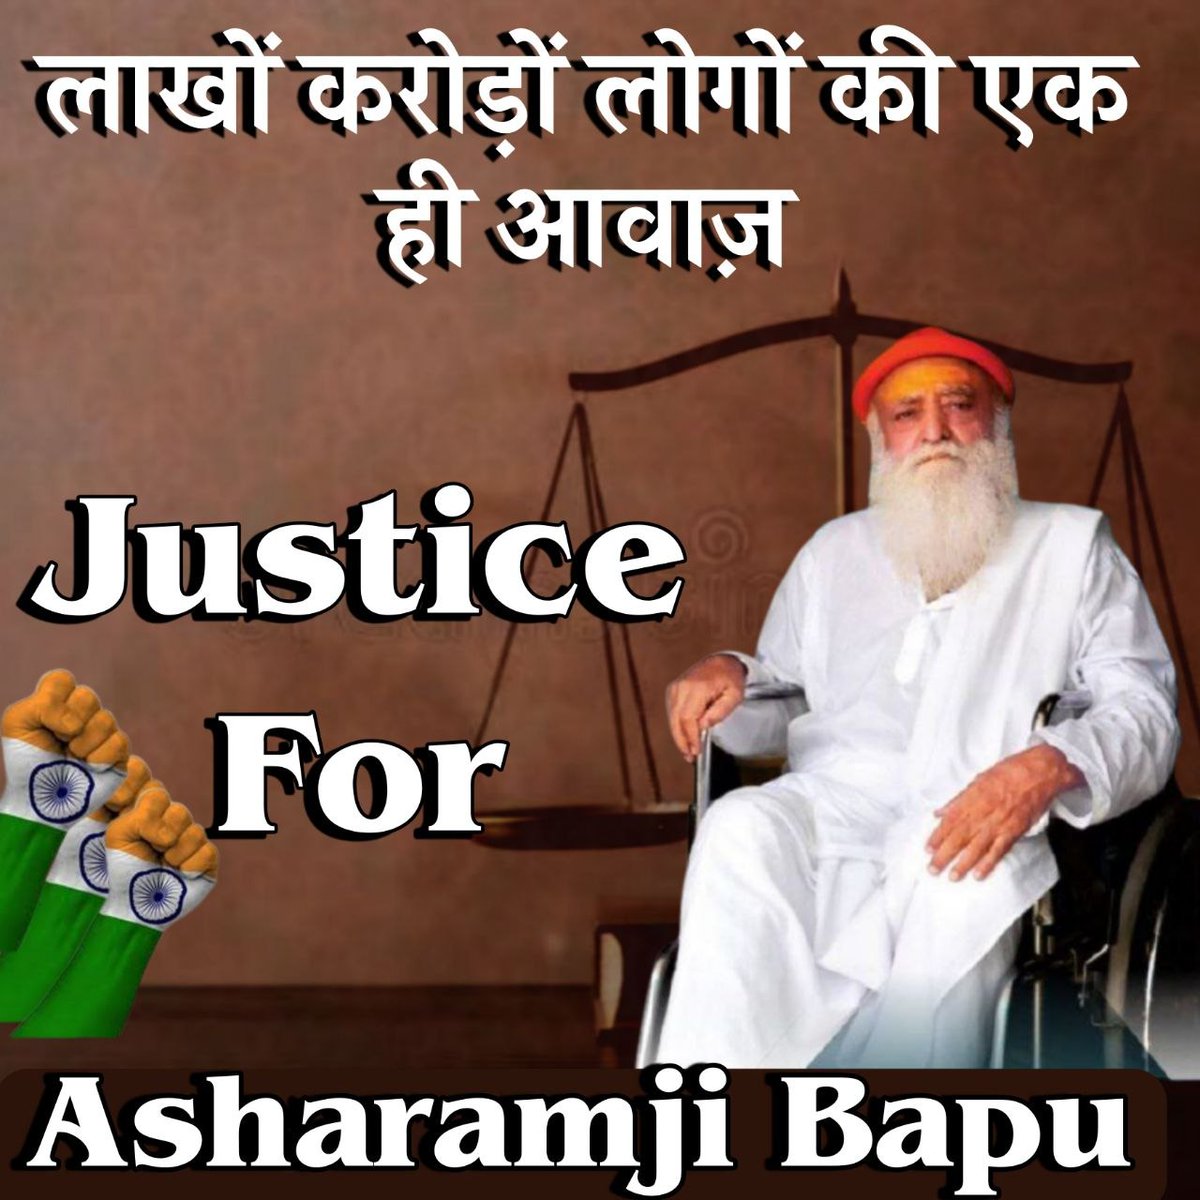 Terrorists,criminals,corrupt politicians,actors get released&bail immediately, but an innocent hindu saint Sant Shri Asharamji Bapu denied justice. Why is truth  hidden from all?  Now we demand release of Bapuji and 
Fair Justice. 
Sanatan
#StandUpForDharma